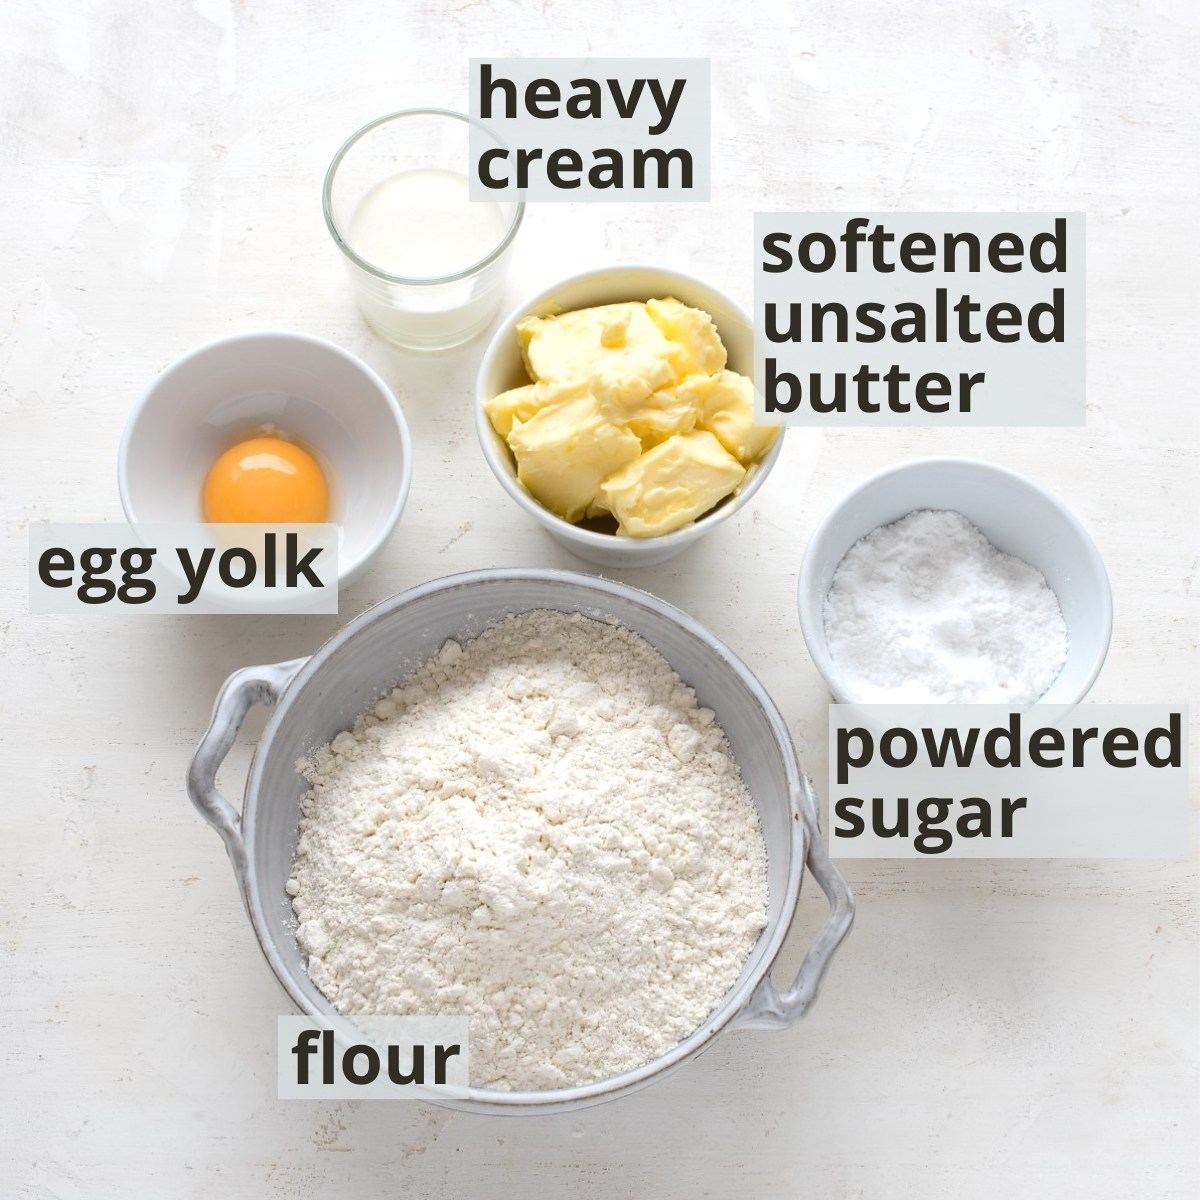 Ingredients for cookies made with heavy cream, inclusive captions.